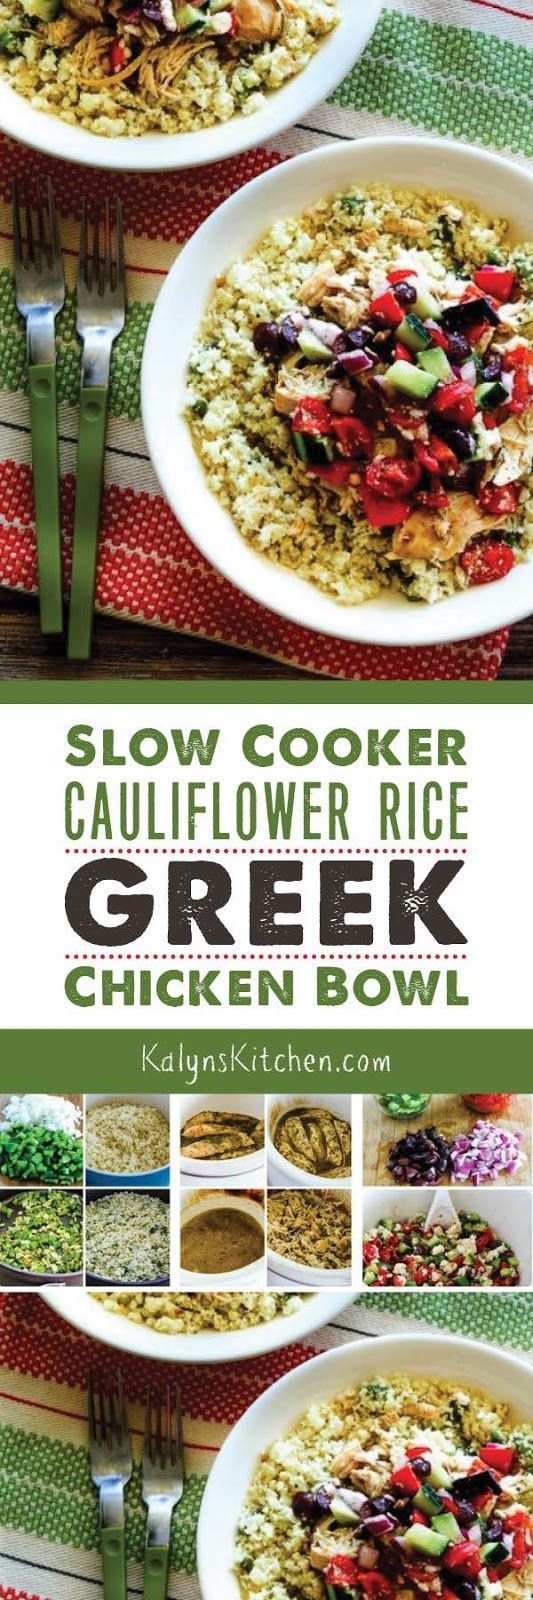 Slow Cooker Cauliflower Rice Greek Chicken Bowl is a tasty low-carb meal that’s good any time of year, and this delicious slow